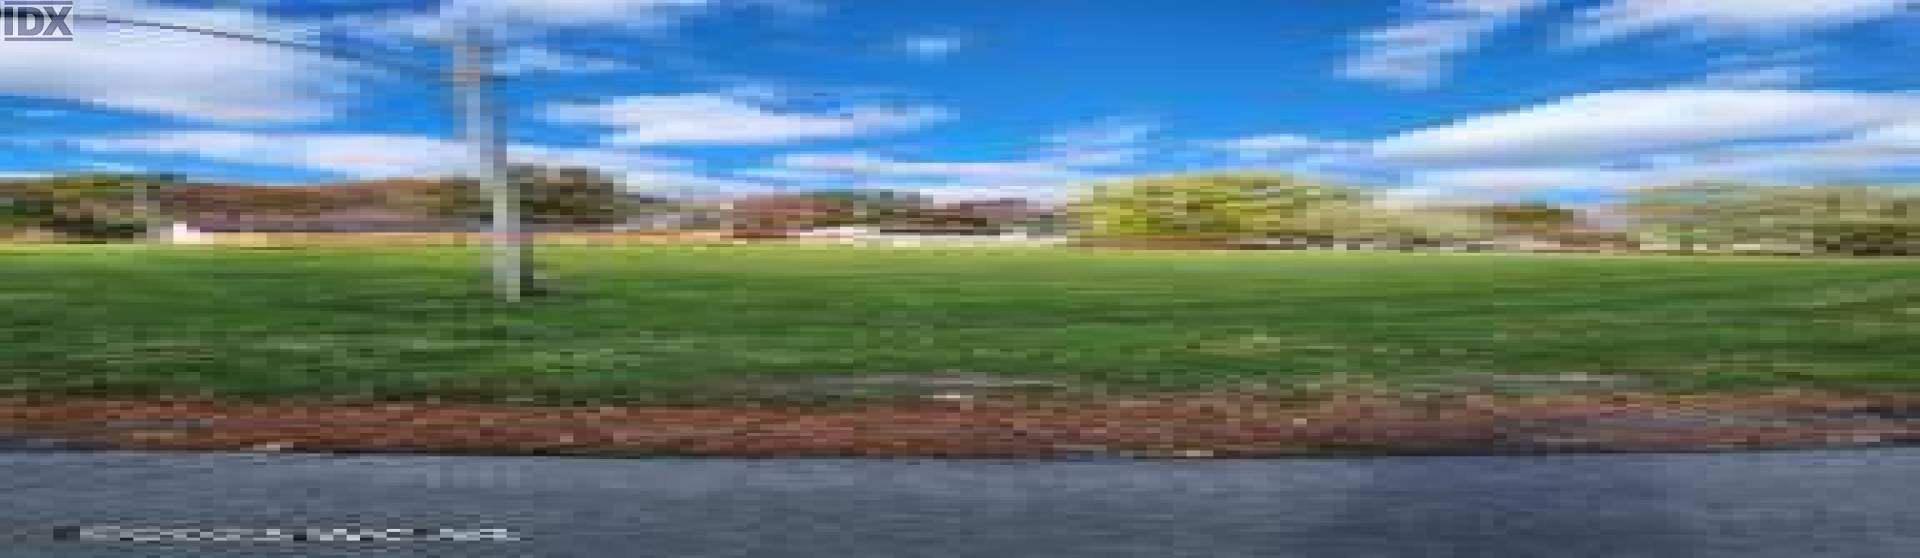 Lincoln Boulevard, Russells Point, ,Land,For Sale,Lincoln,302478